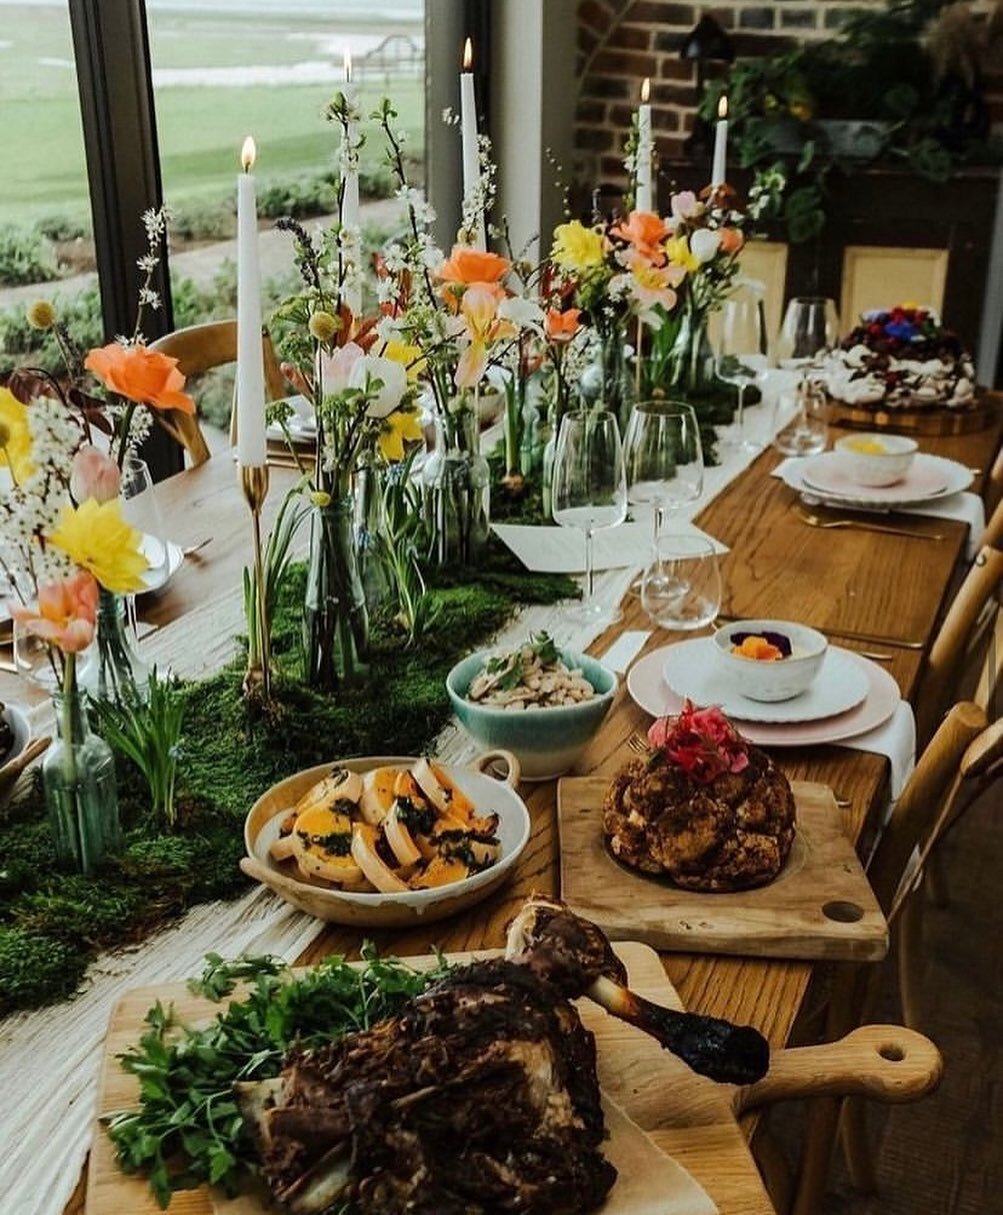 Happy Easter Sunday.....
Throwing it back to this beautiful, vibrant spring table that was styled at the wonderful @elmleynature.
We bought lots of seasonal flowers inside including scented narcissi, muscari, tulips &amp; blossom with a living moss r